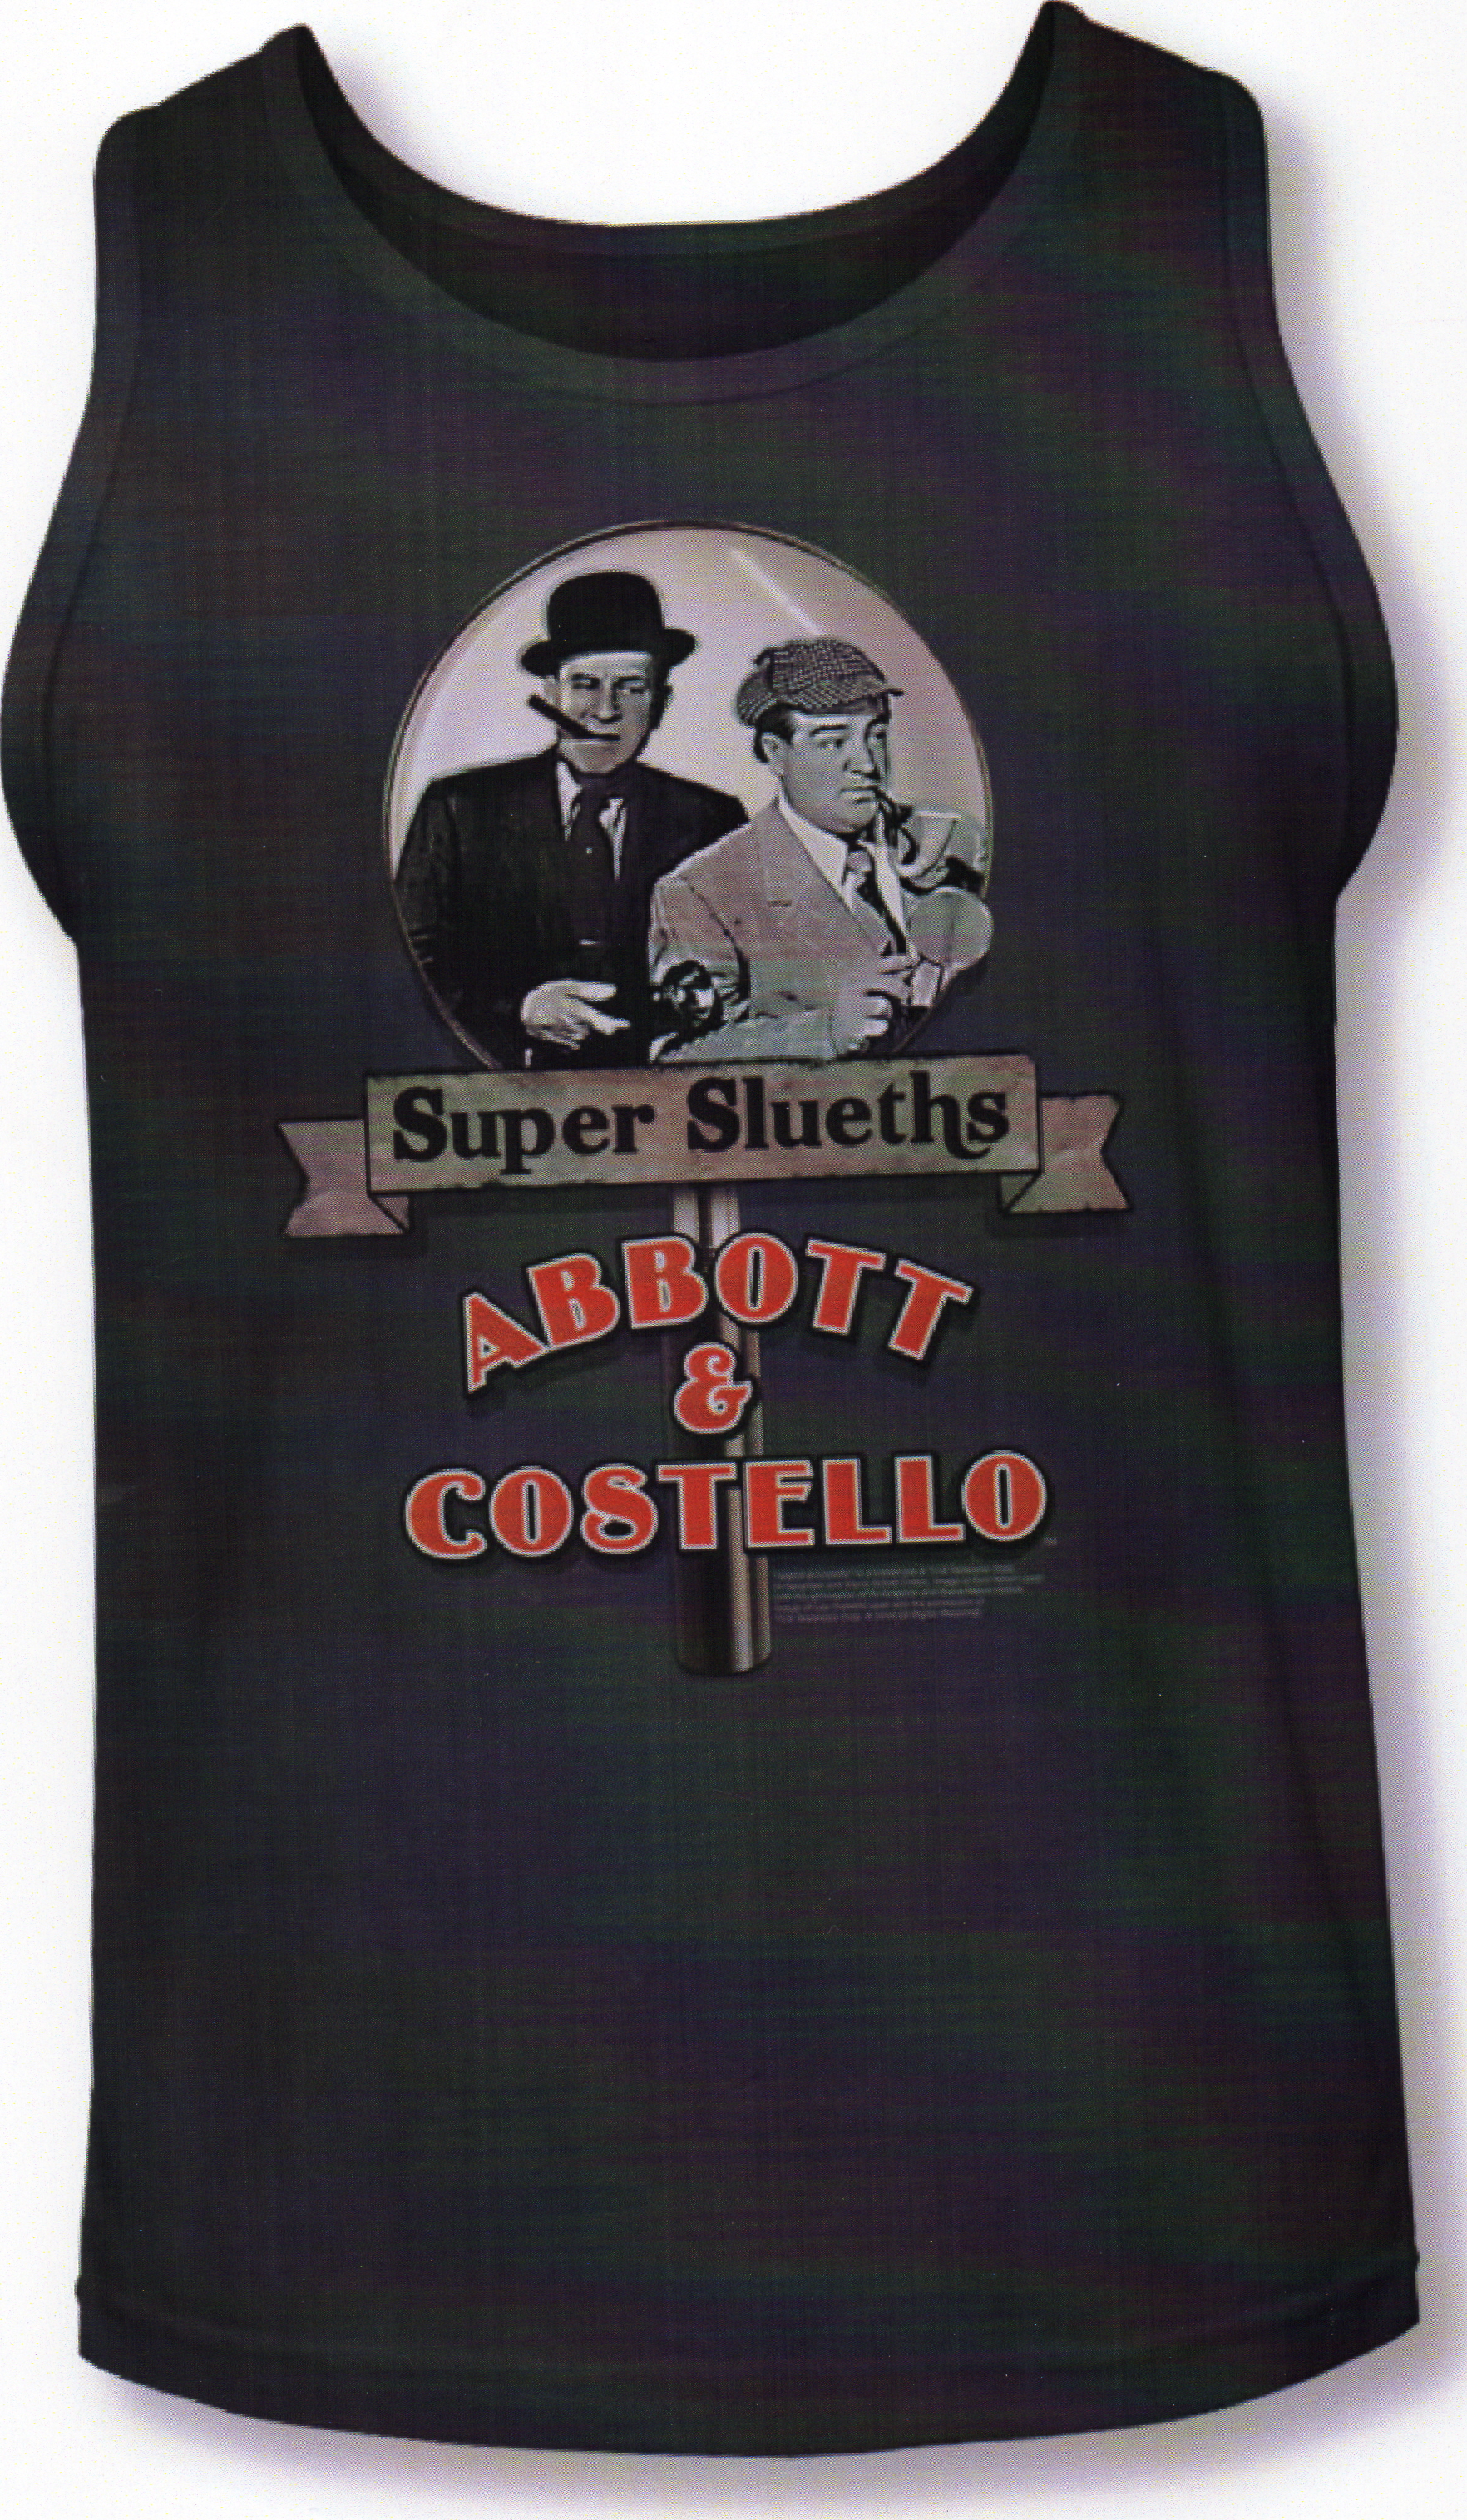 Super Sleuths Tank Top - Click Image to Close